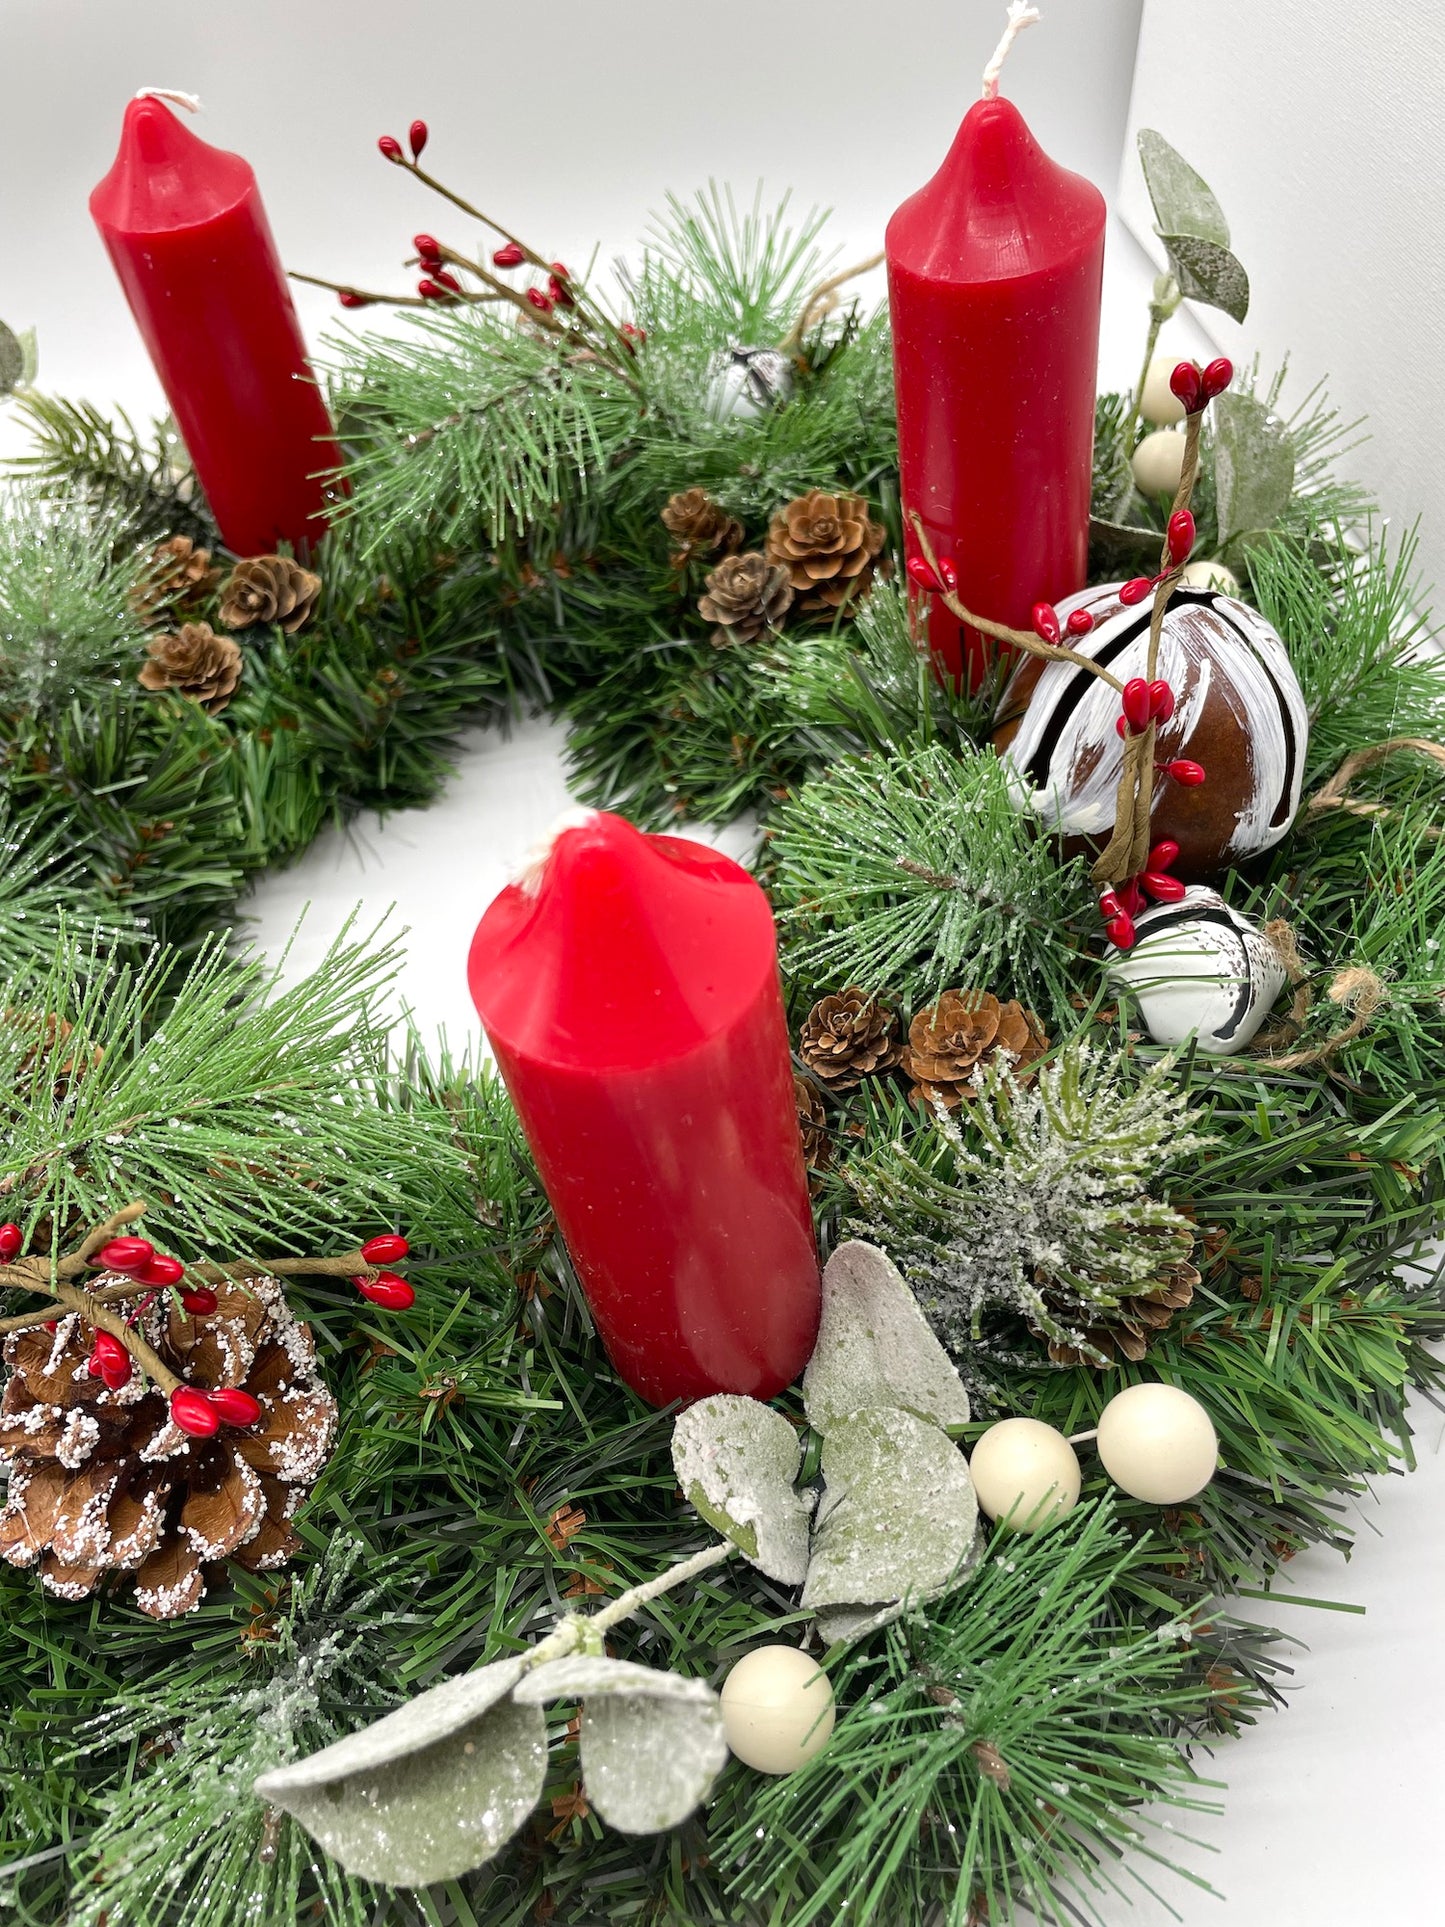 Advent Wreath with Purple Pink Candles, Christmas Wreath for Dining Table